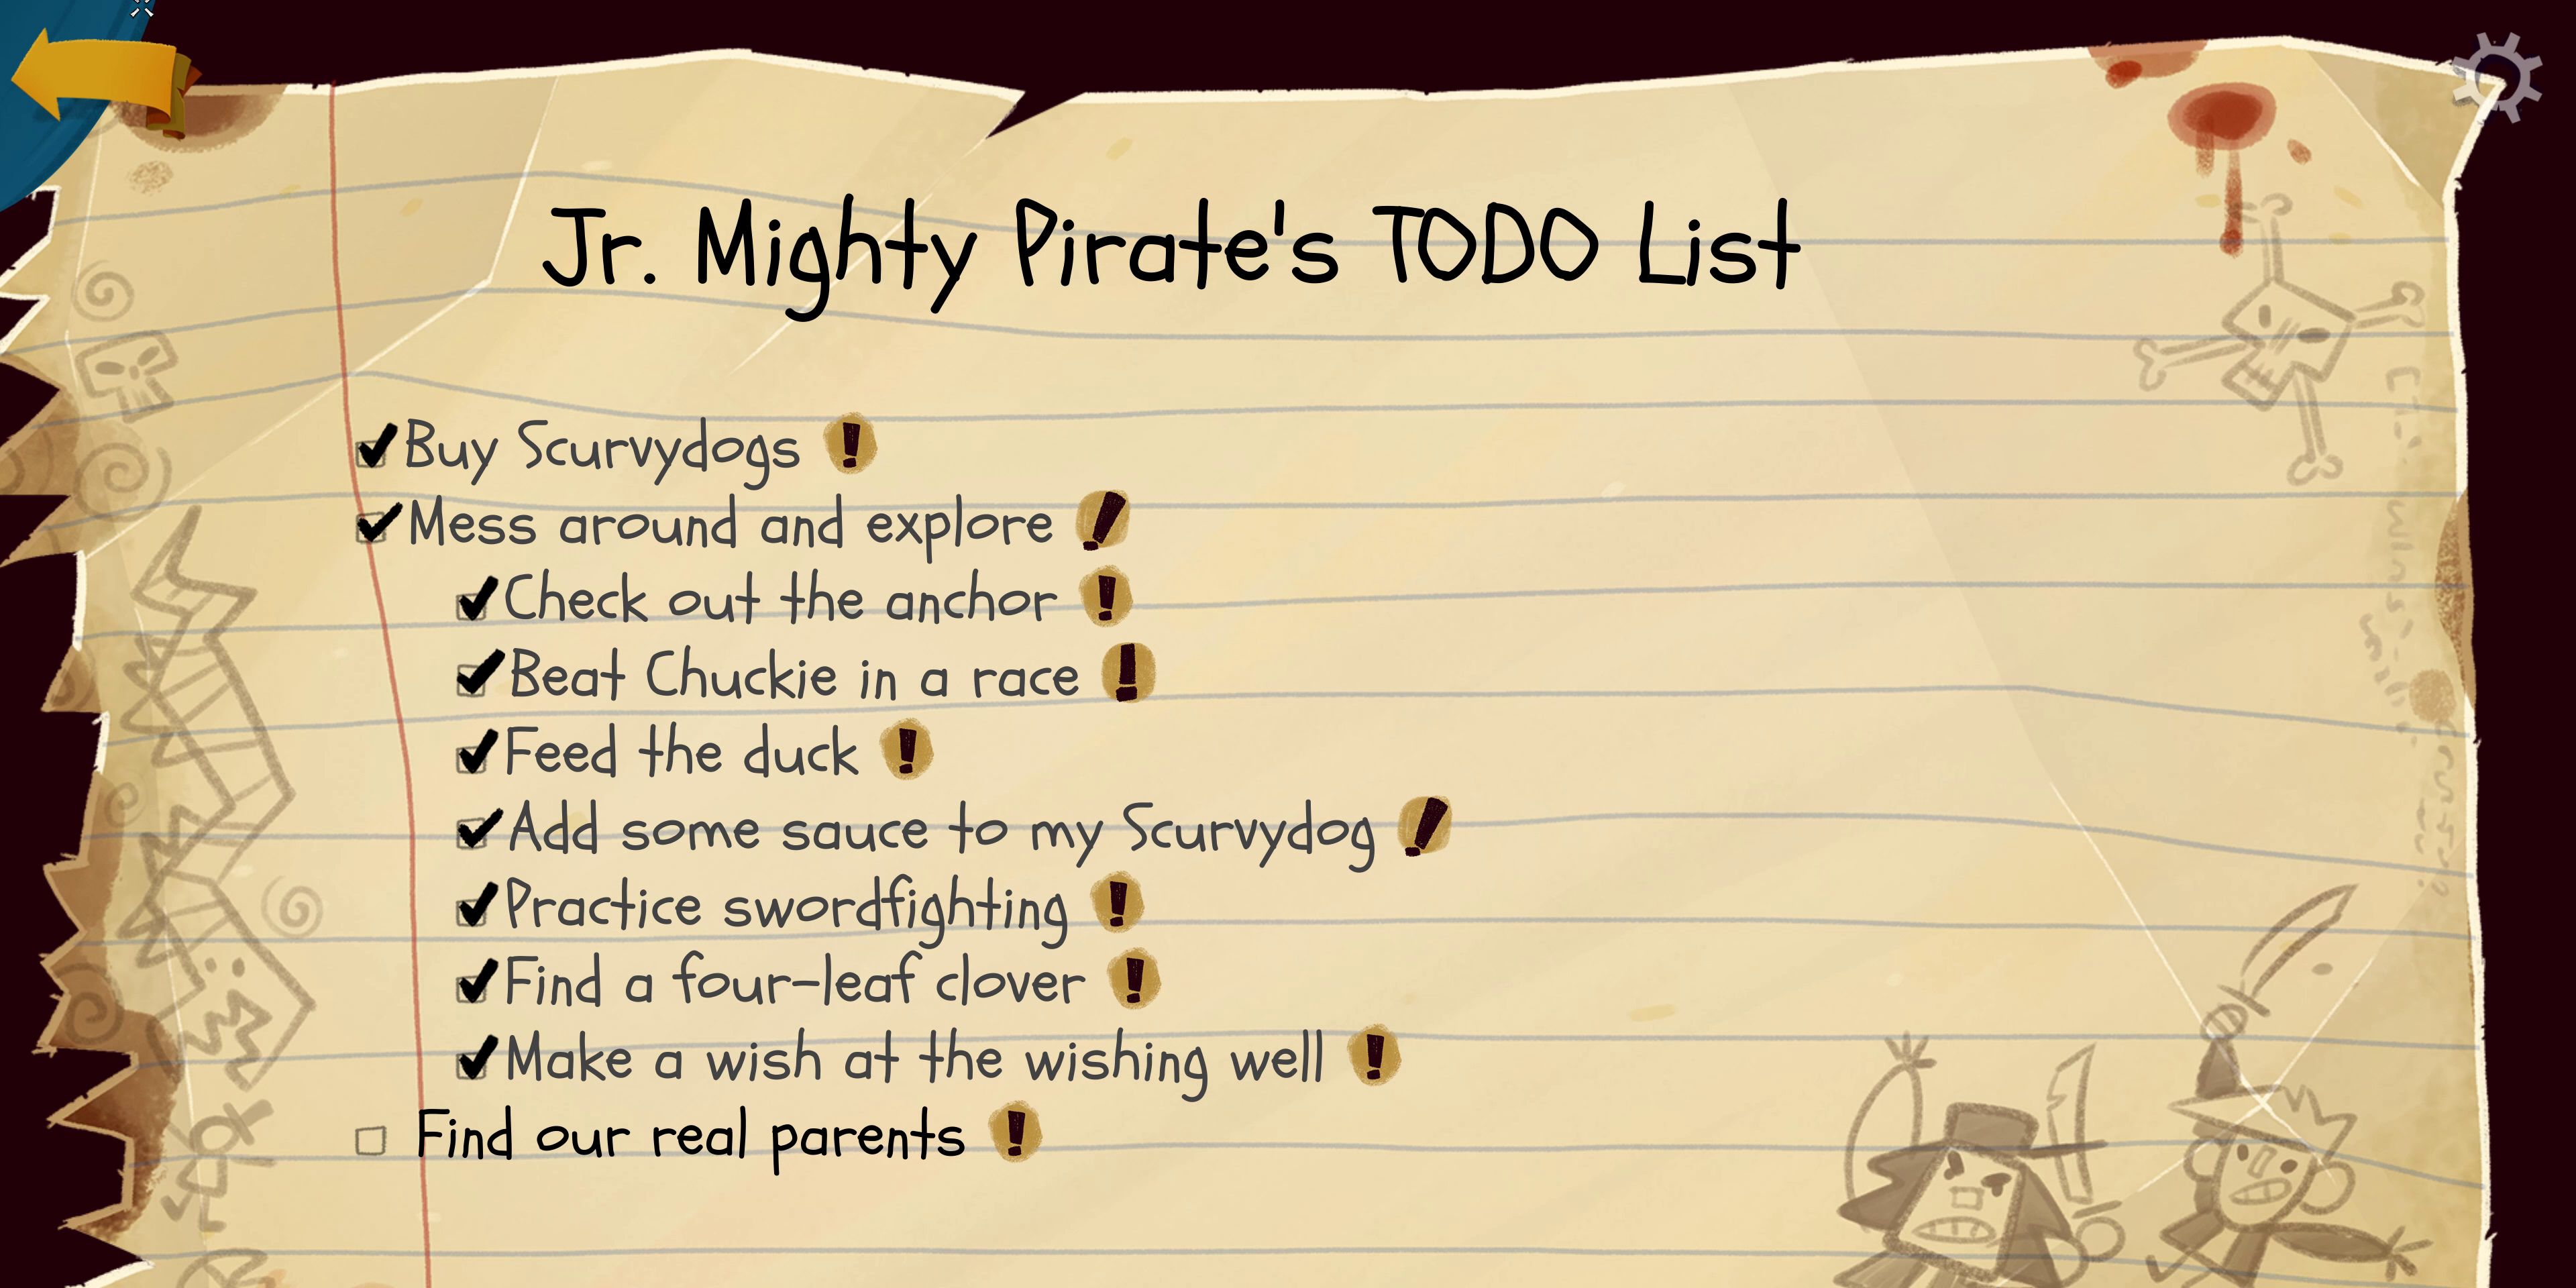 return-to-monkey-island-prelude-guide-09-completed-to-do-list